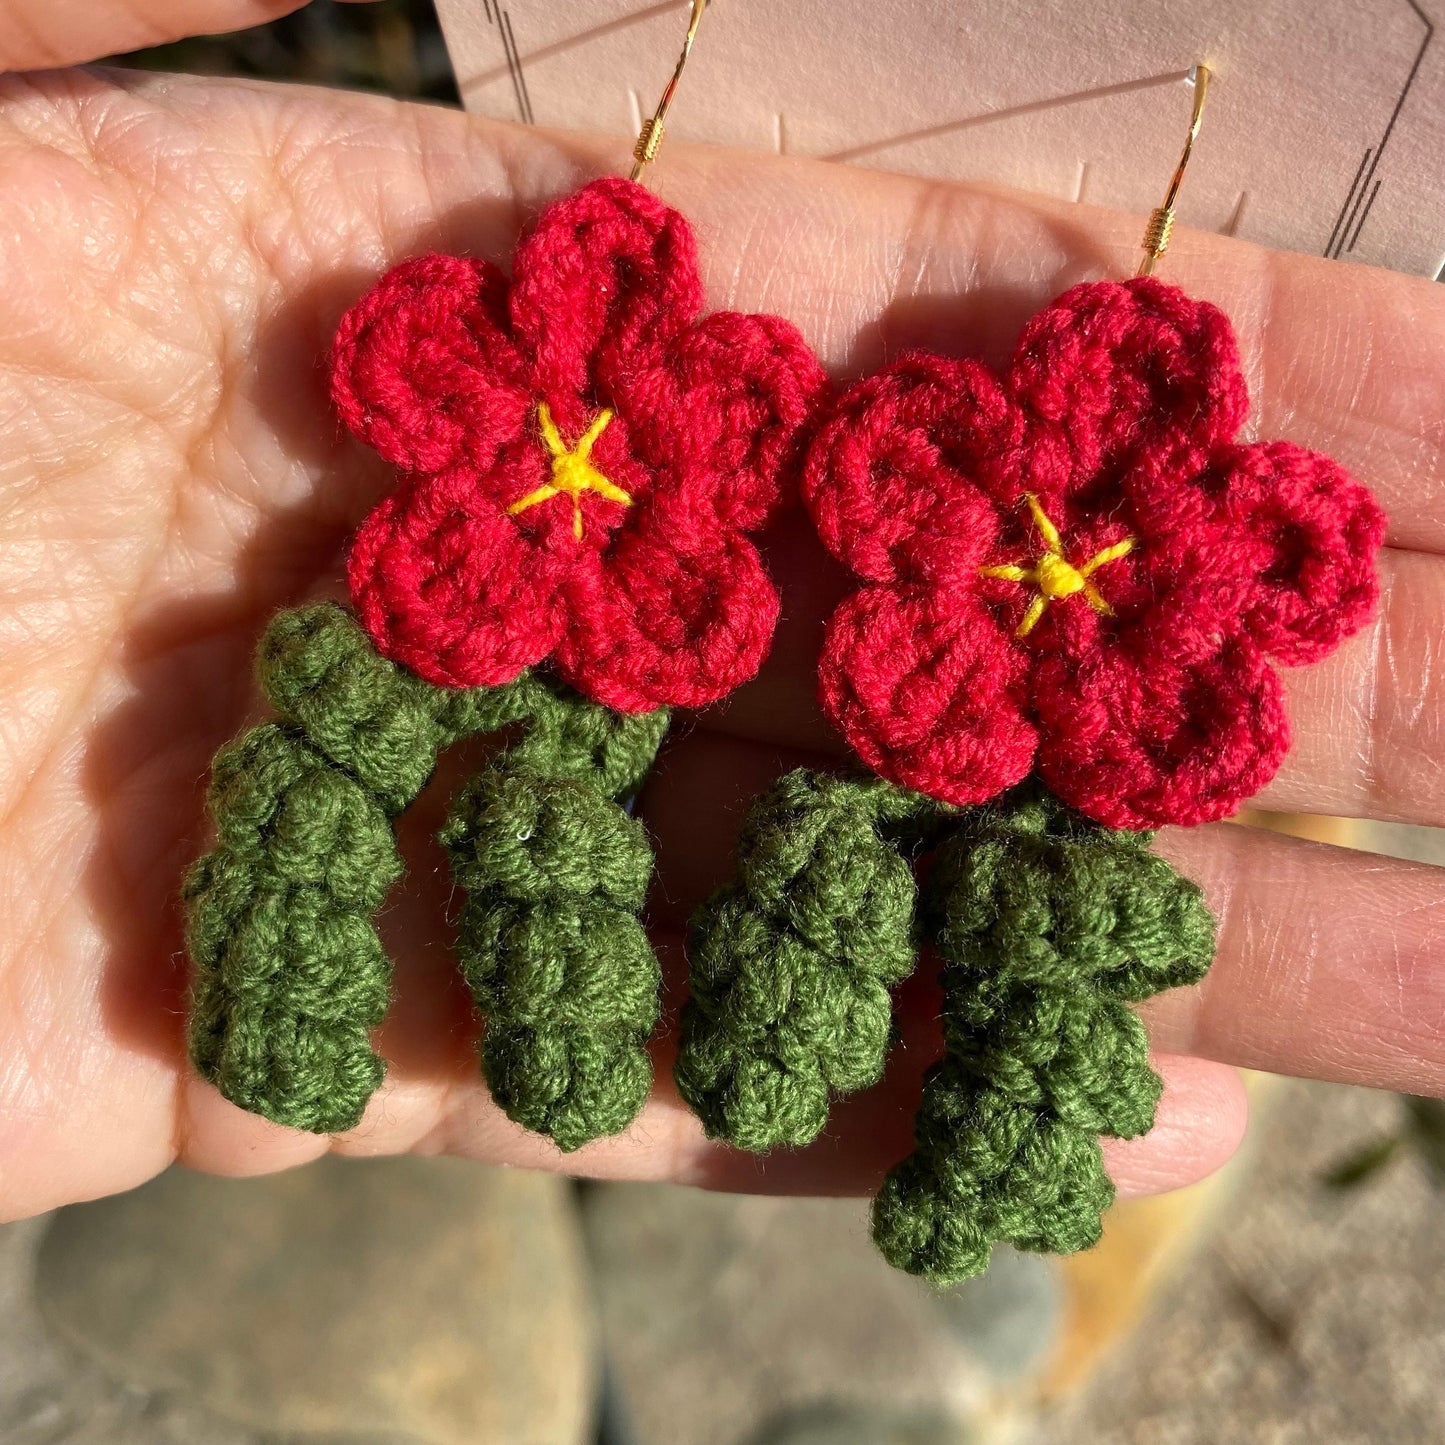 Load image into Gallery viewer, Red flower with curled leaves crochet dangle earrings/Microcrochet/14k gold/gift for her/kitted twine/Knitting handmade jewelry/Ship from US
